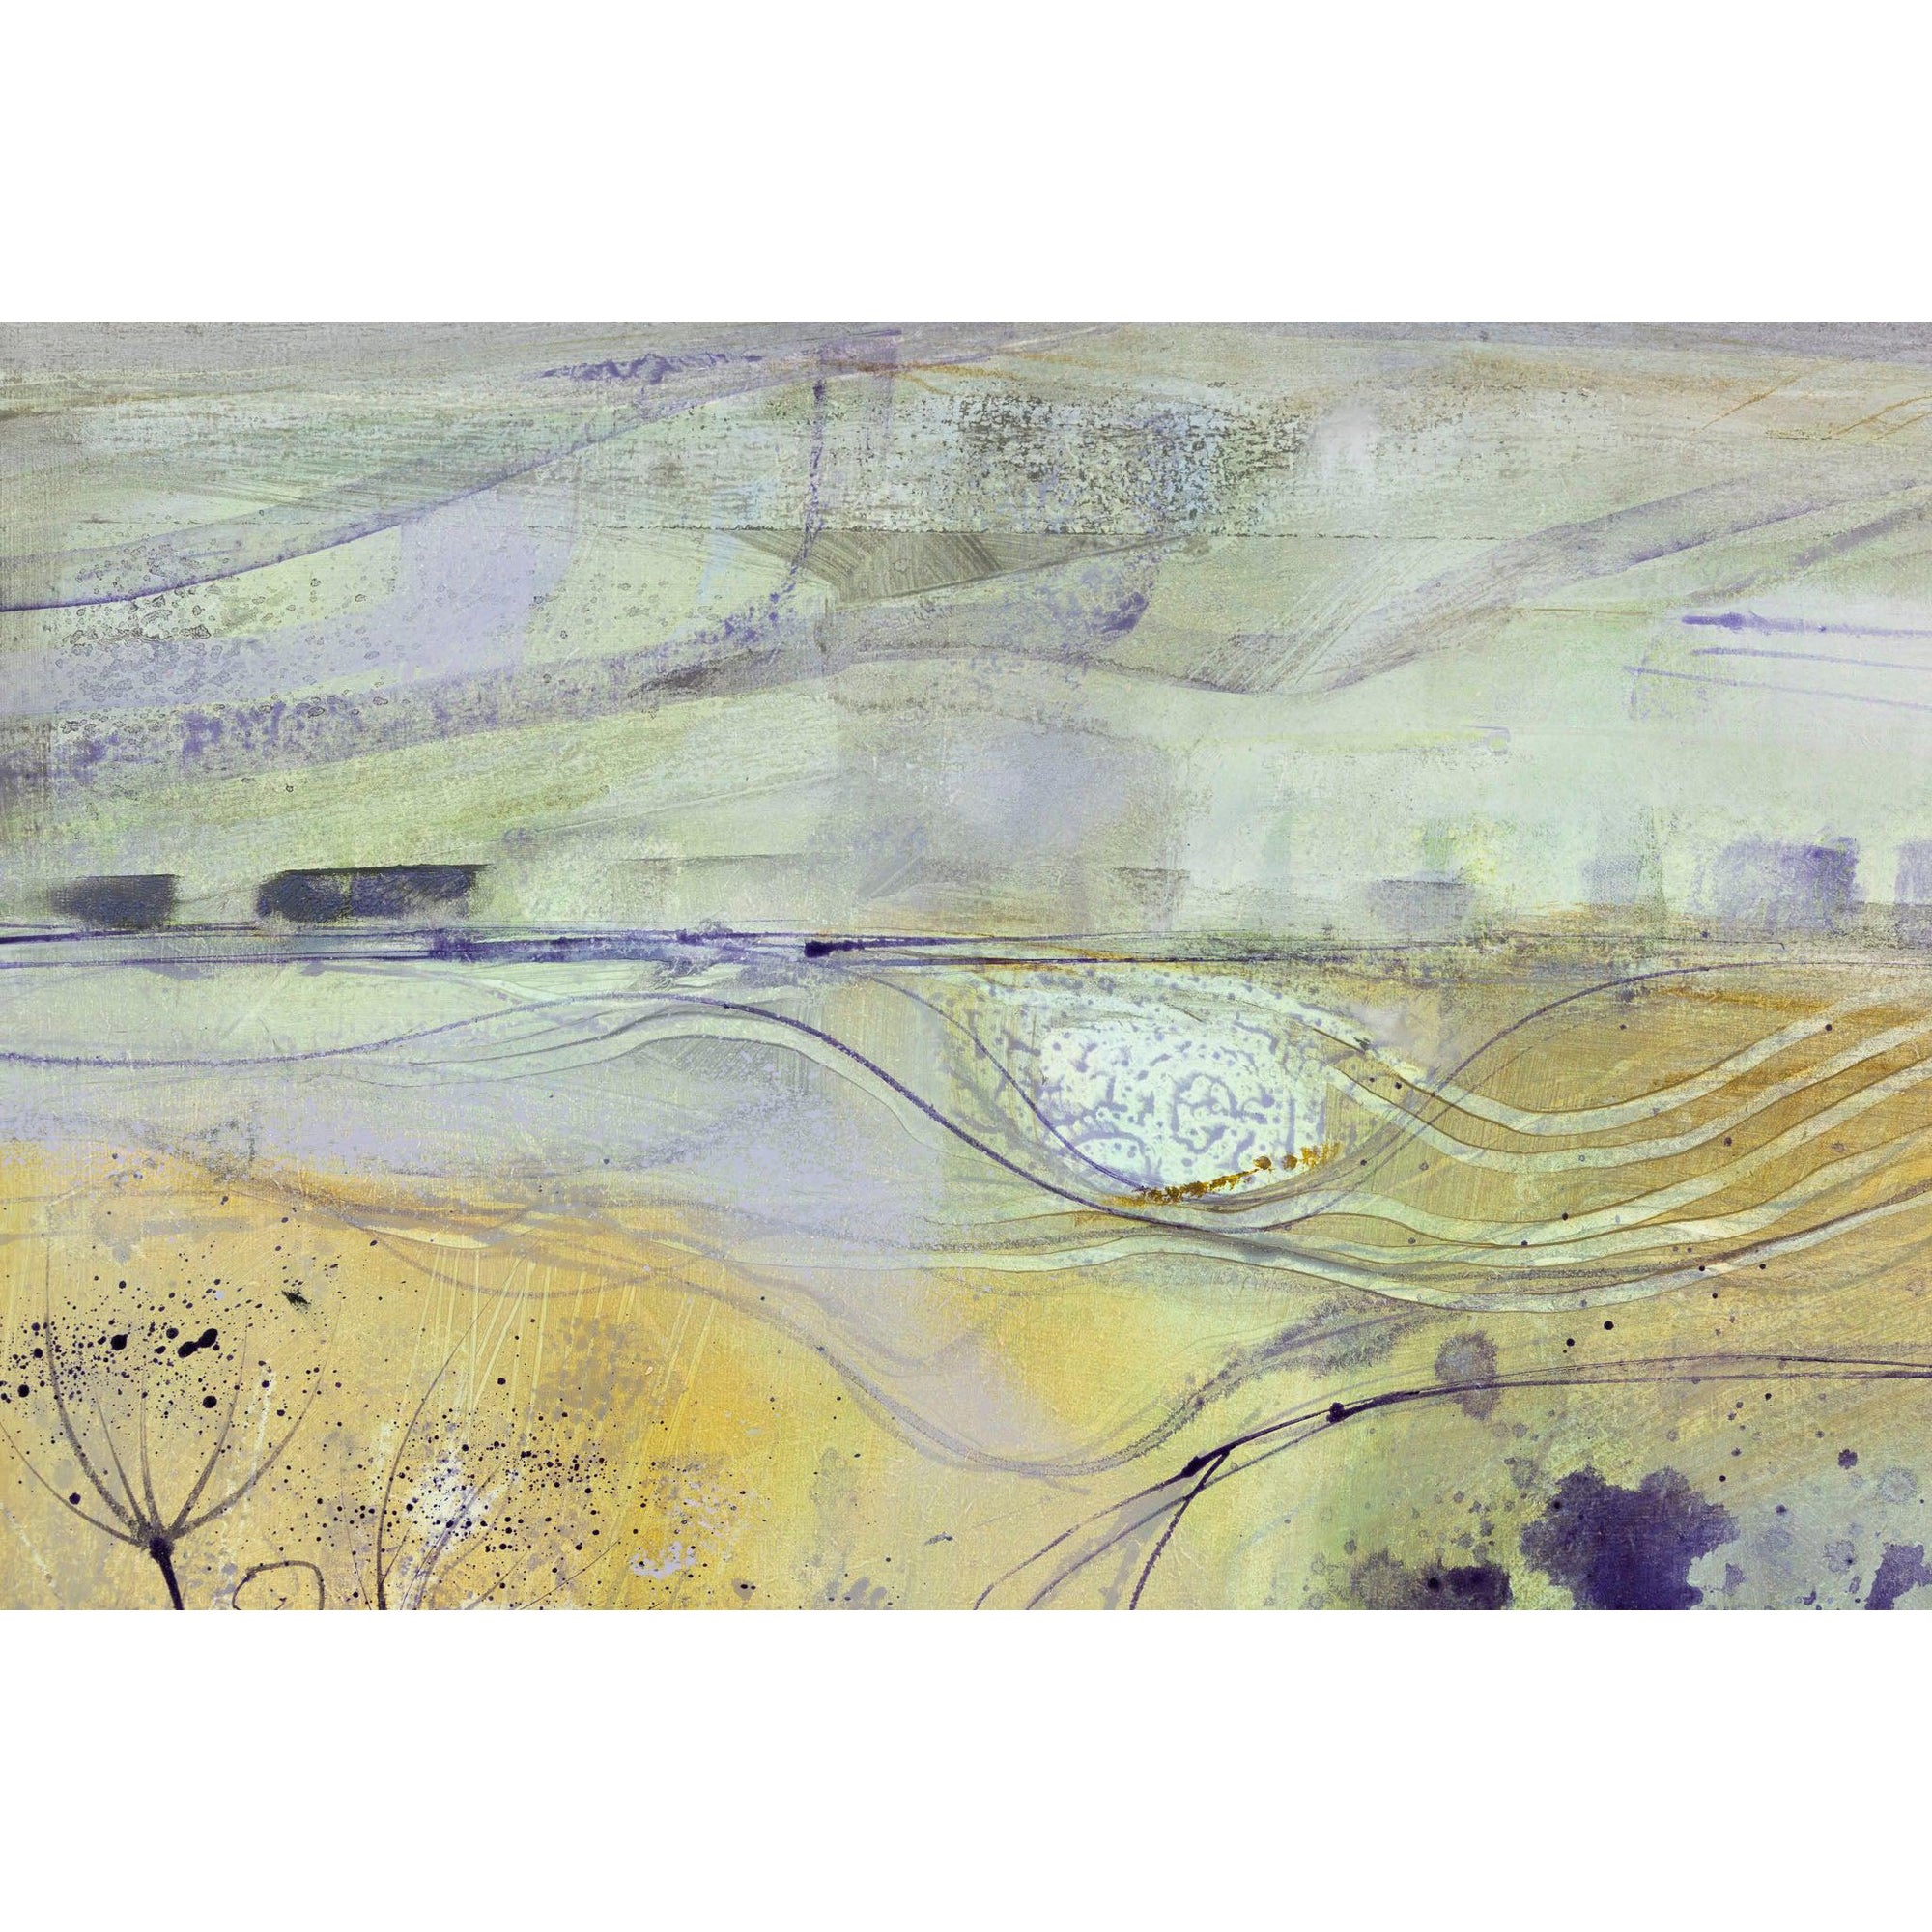 All the Scented Air, oil on board, by Ruth Taylor, available at Padstow Gallery, Cornwall